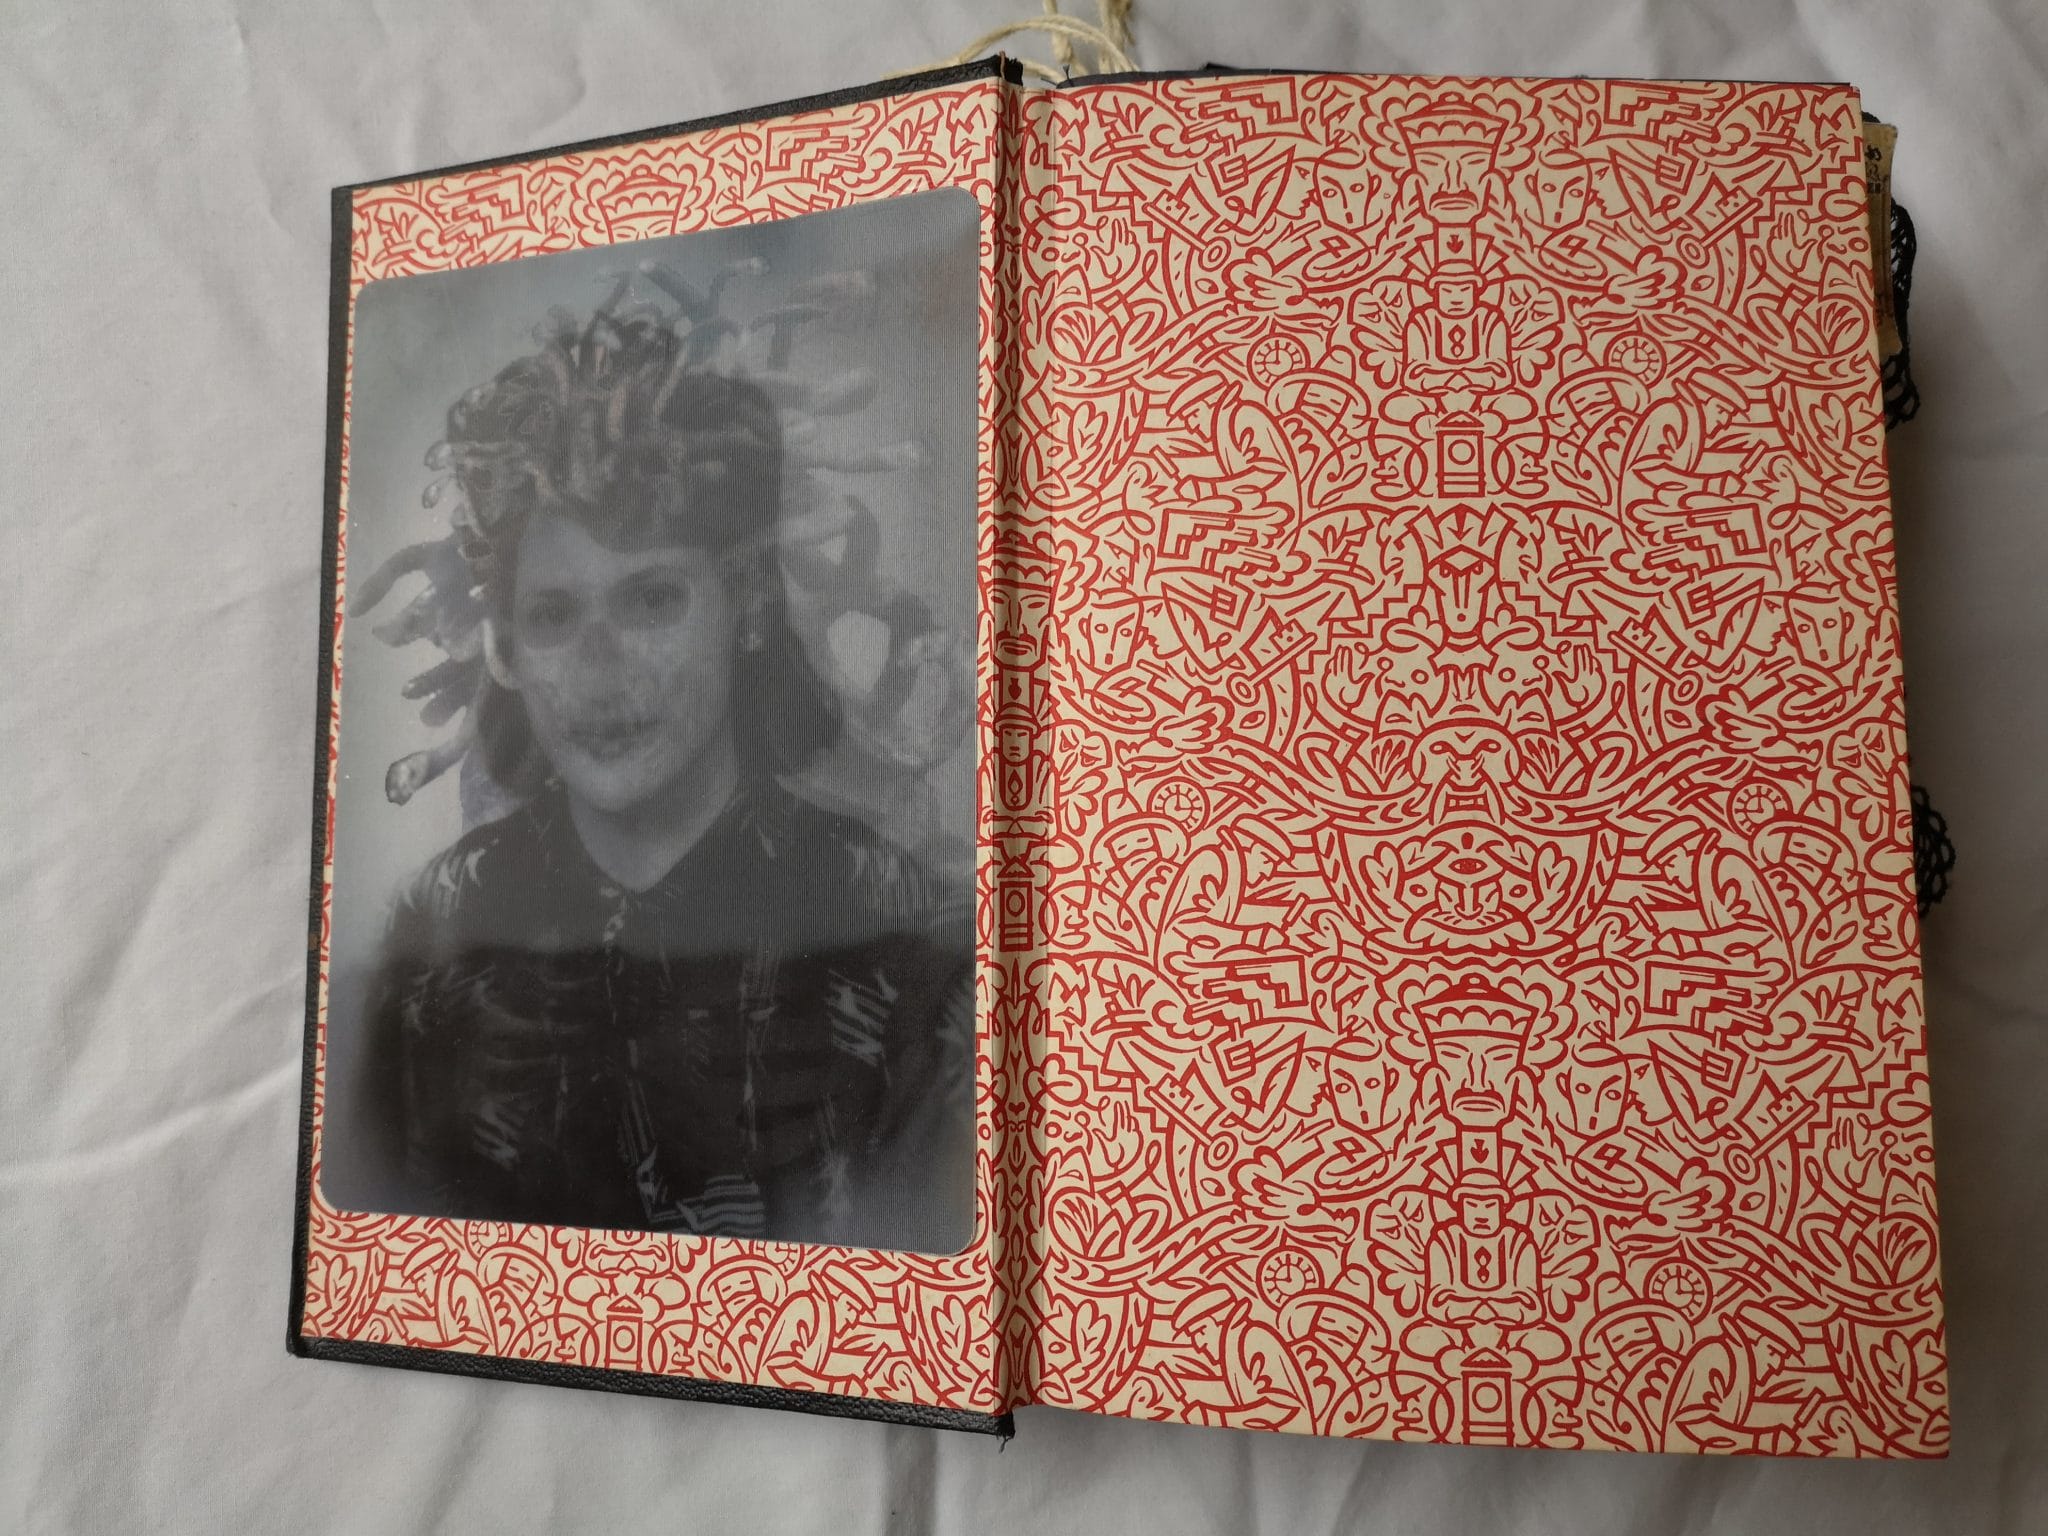 holographic picture on inside cover of Gothic junk journal